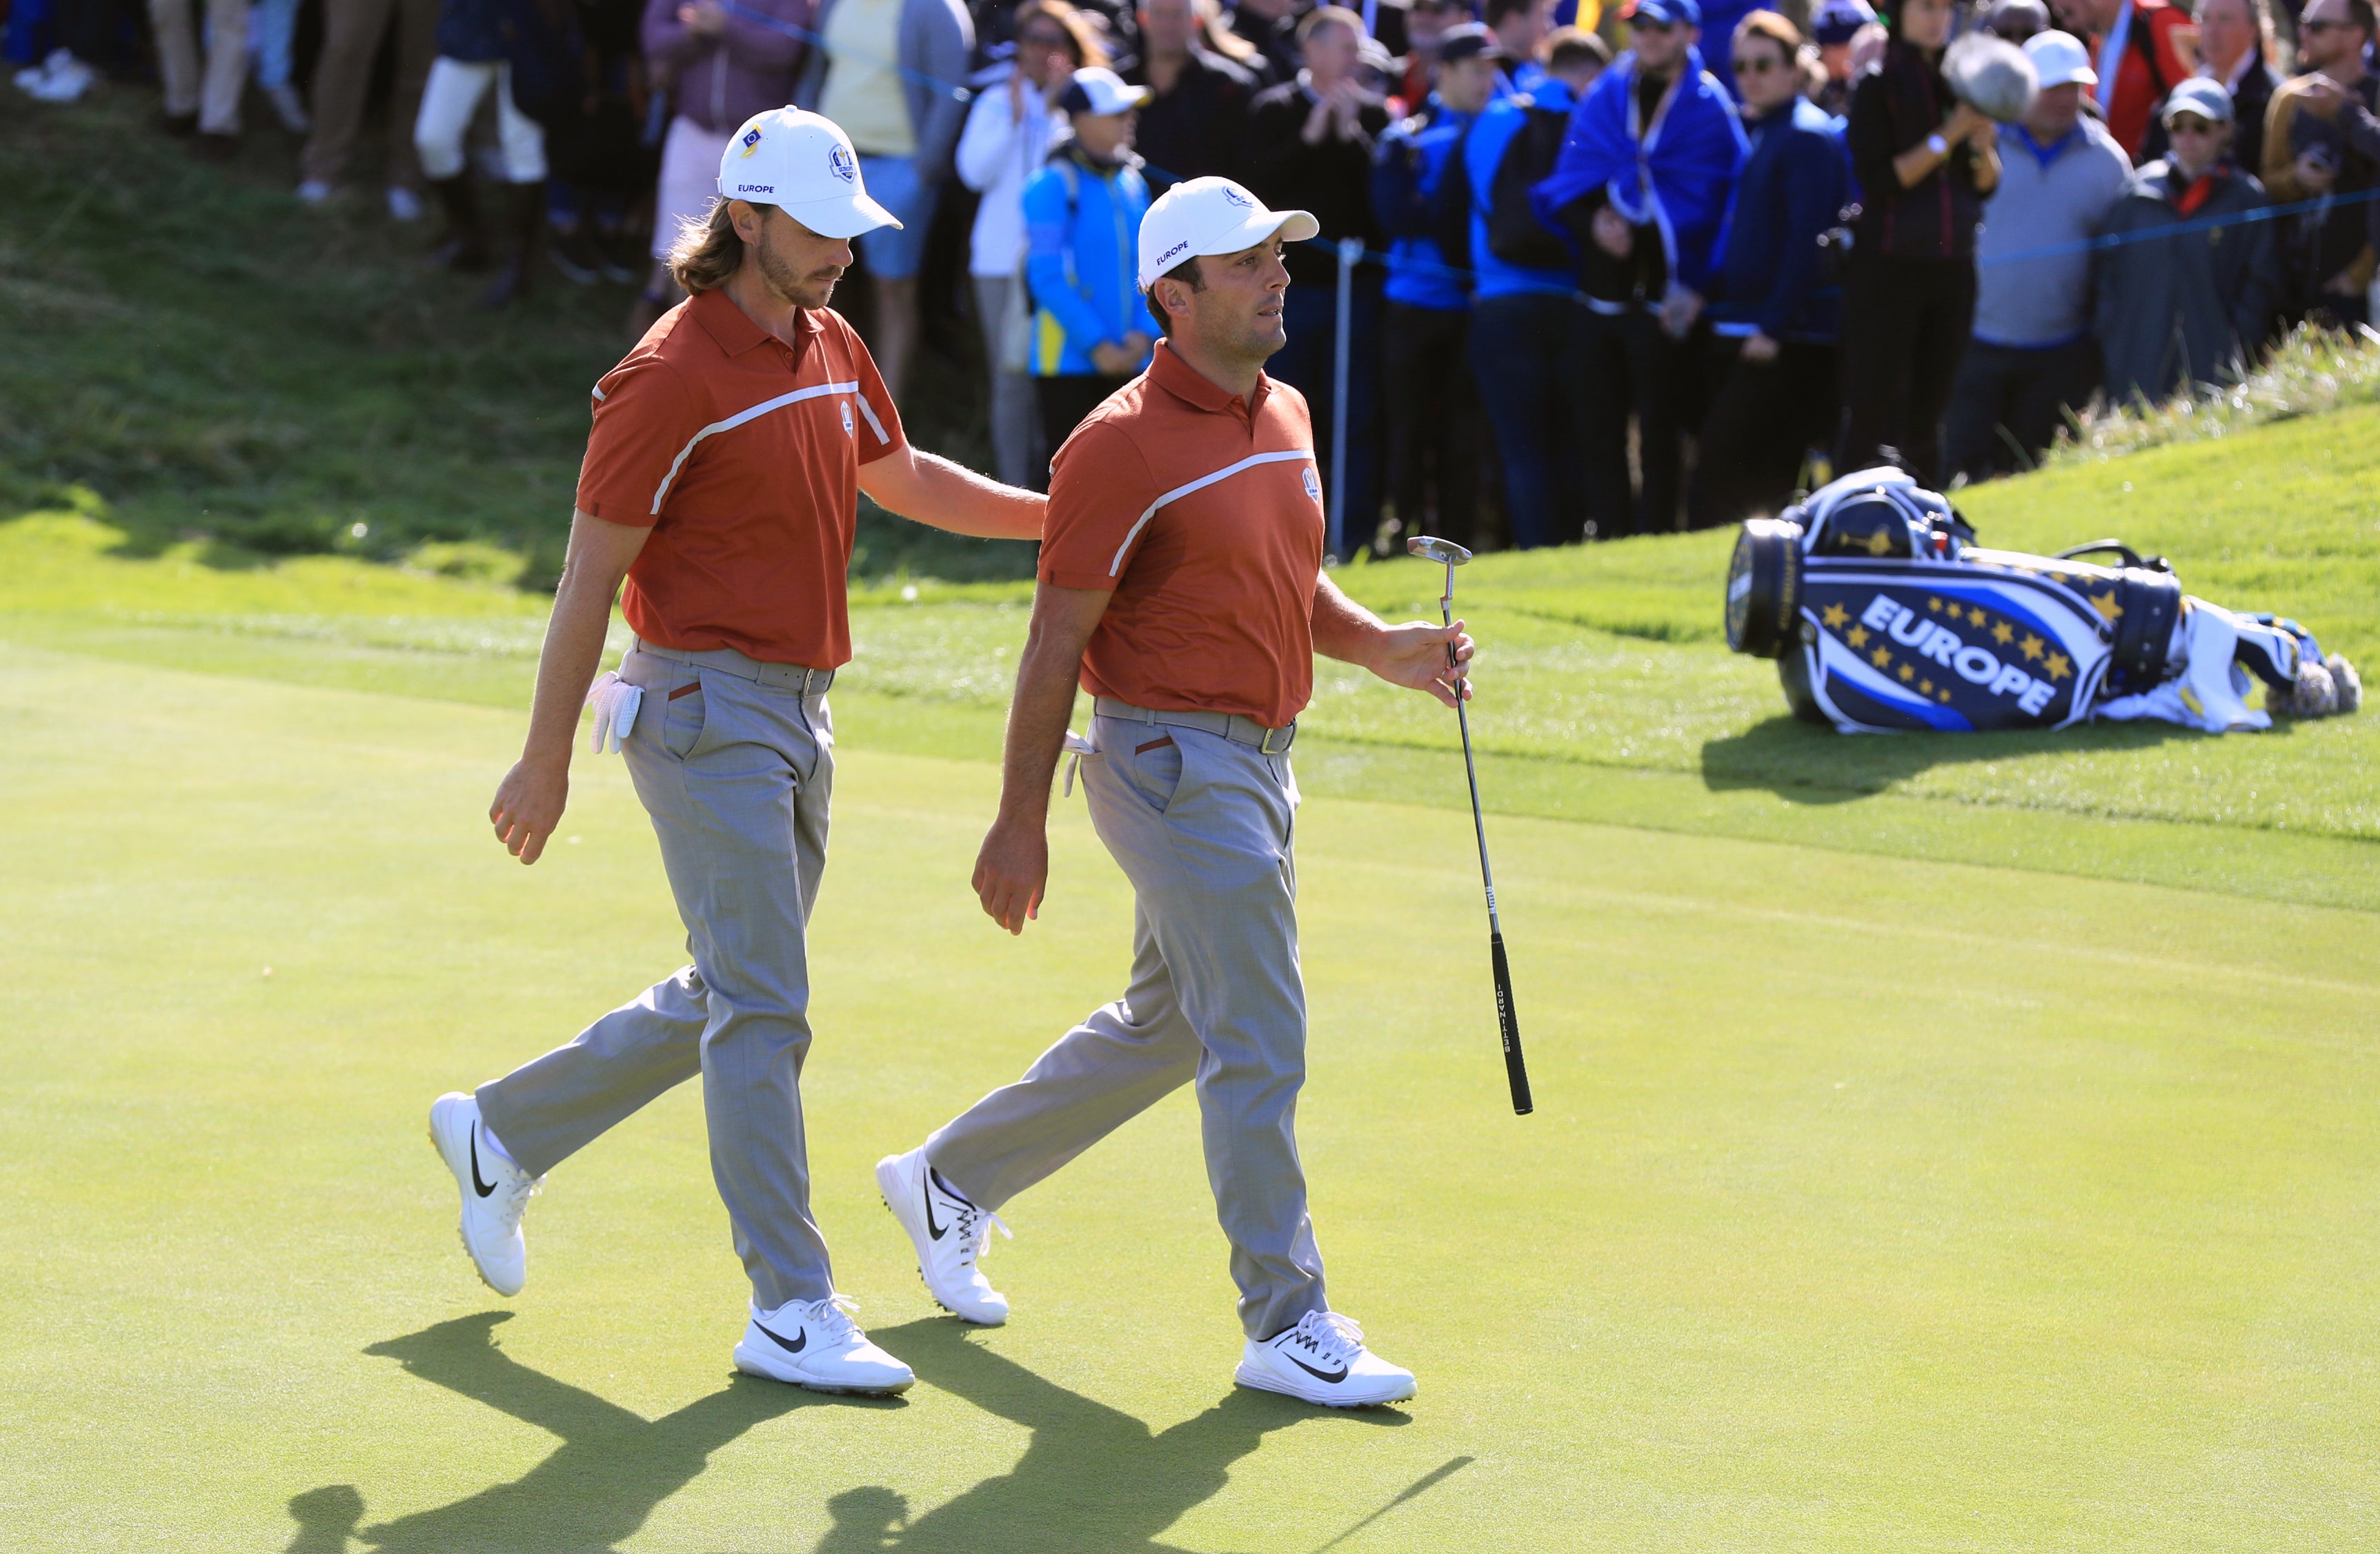 Fleetwood and Molinari won four points together over the first two days of the 2018 Ryder Cup (Gareth Fuller/PA)